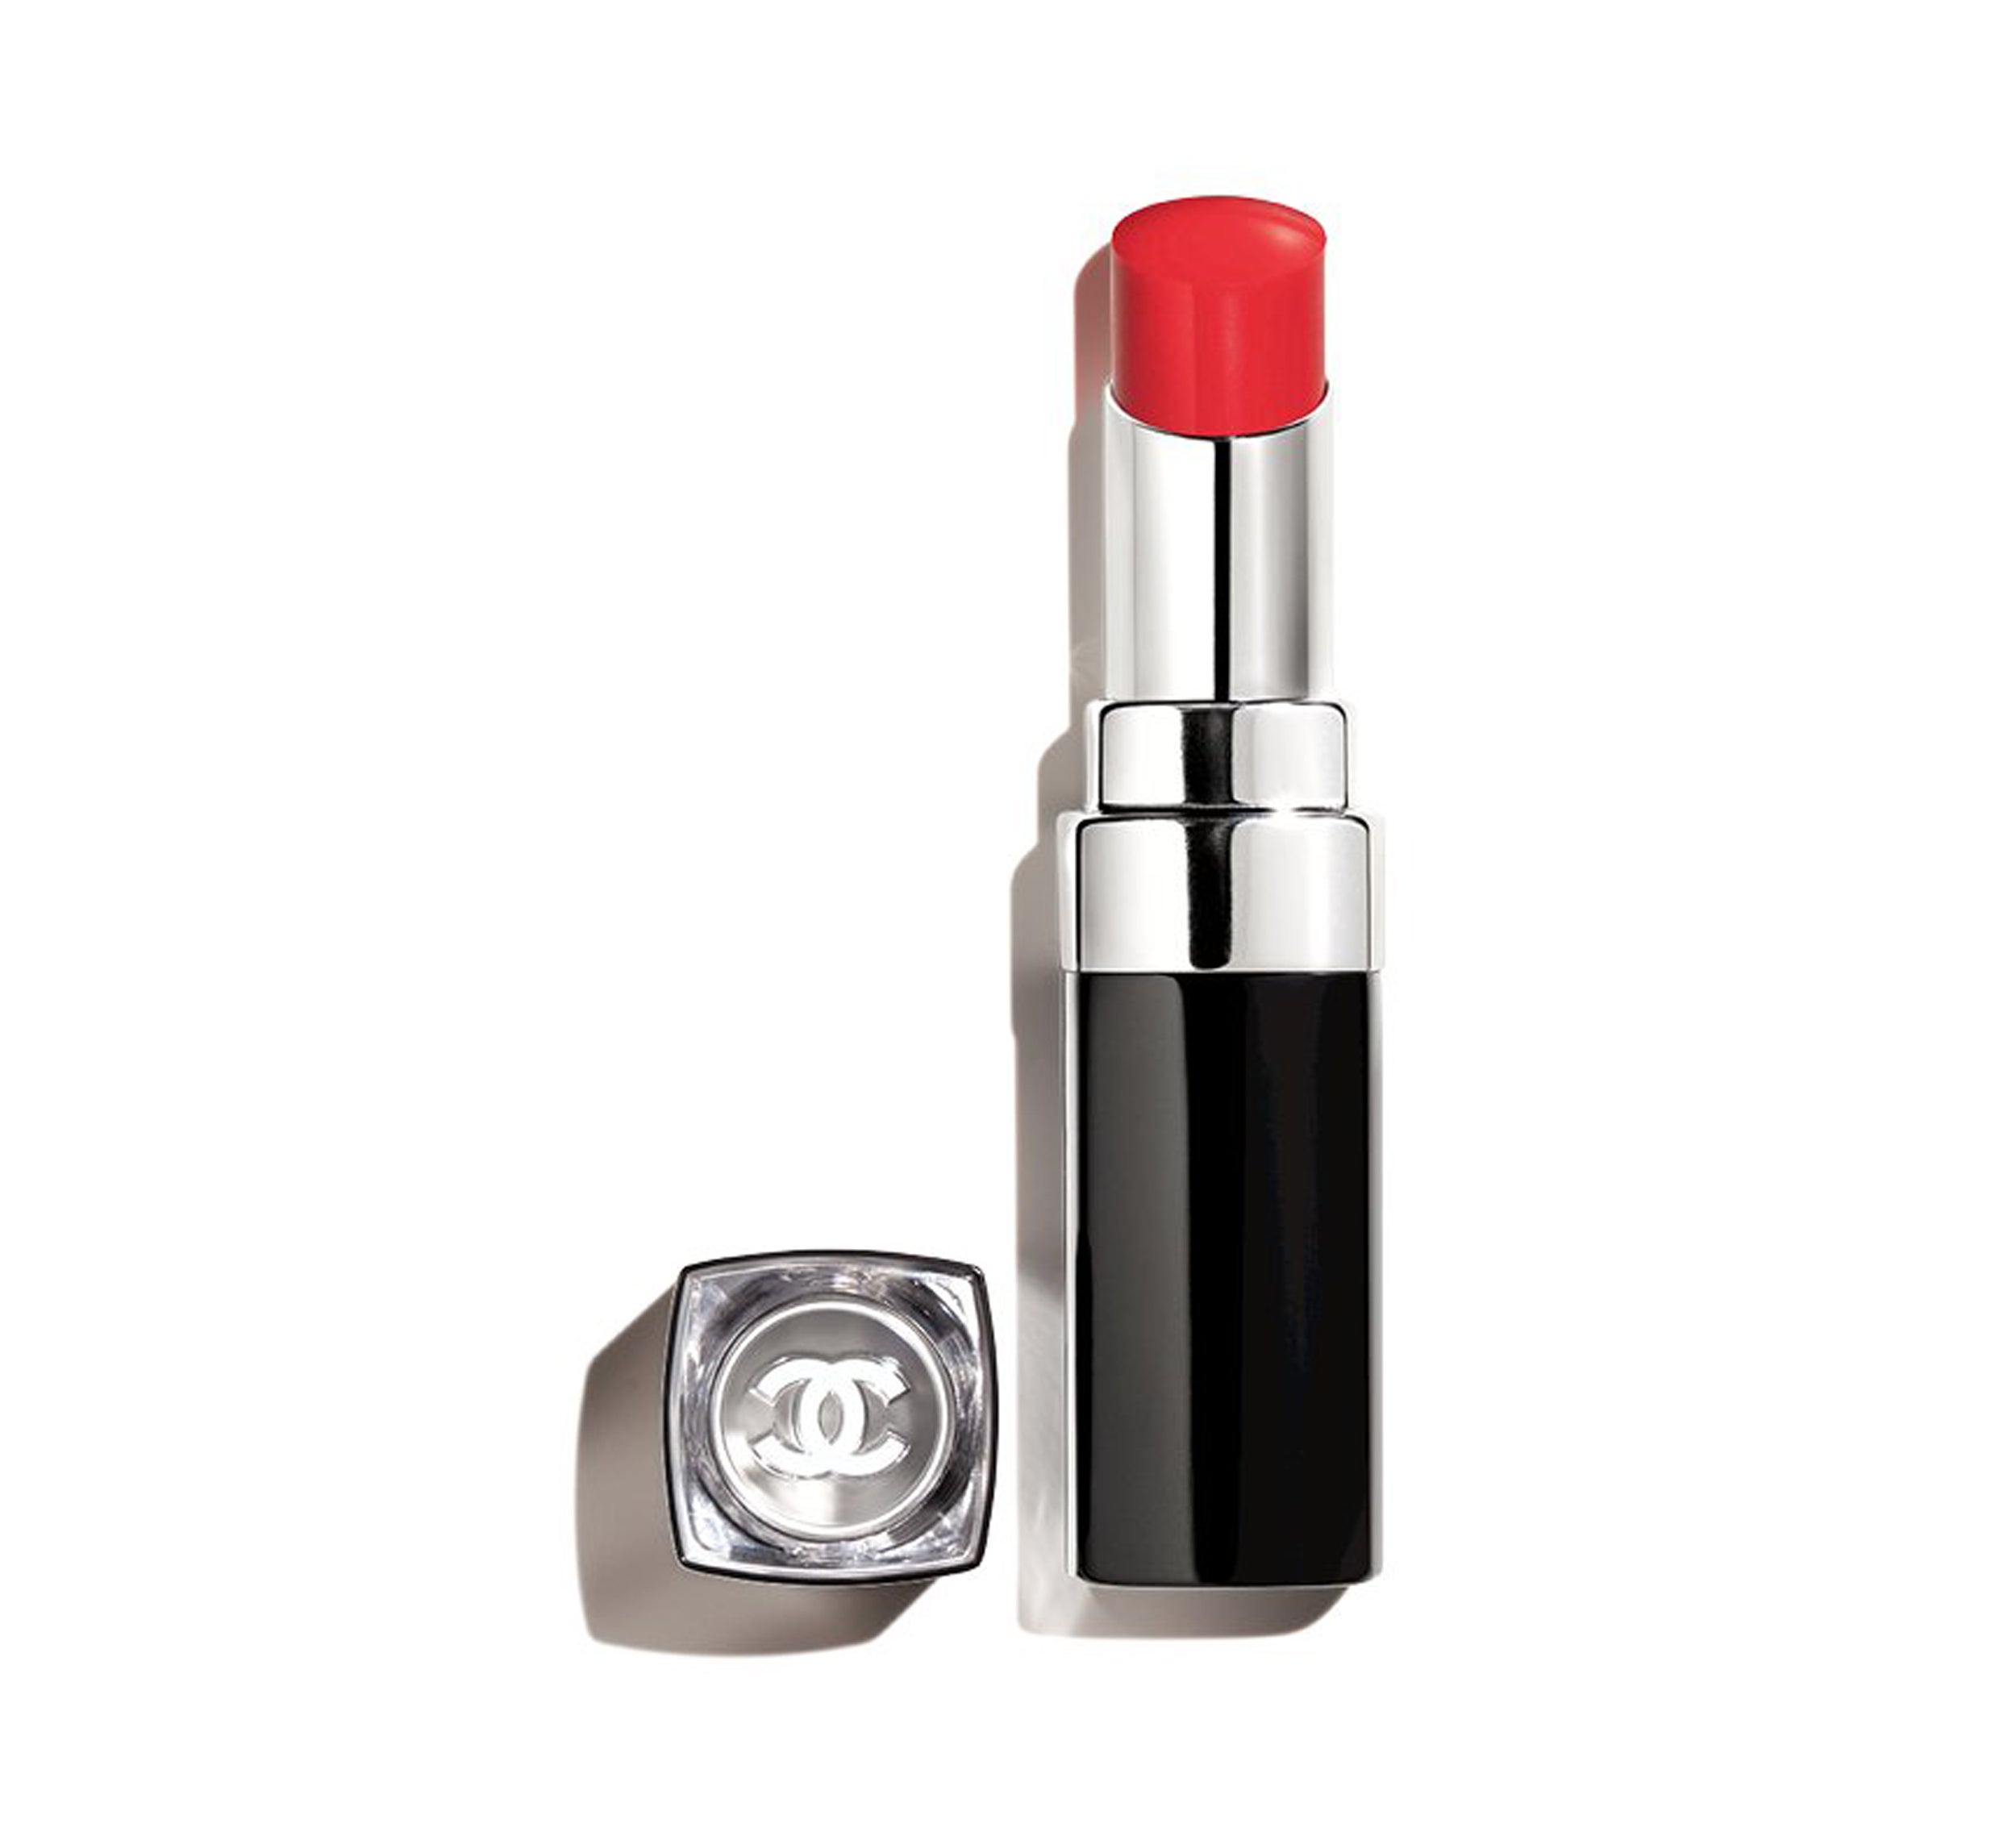 Chanel Rouge Coco Bloom in Blossom